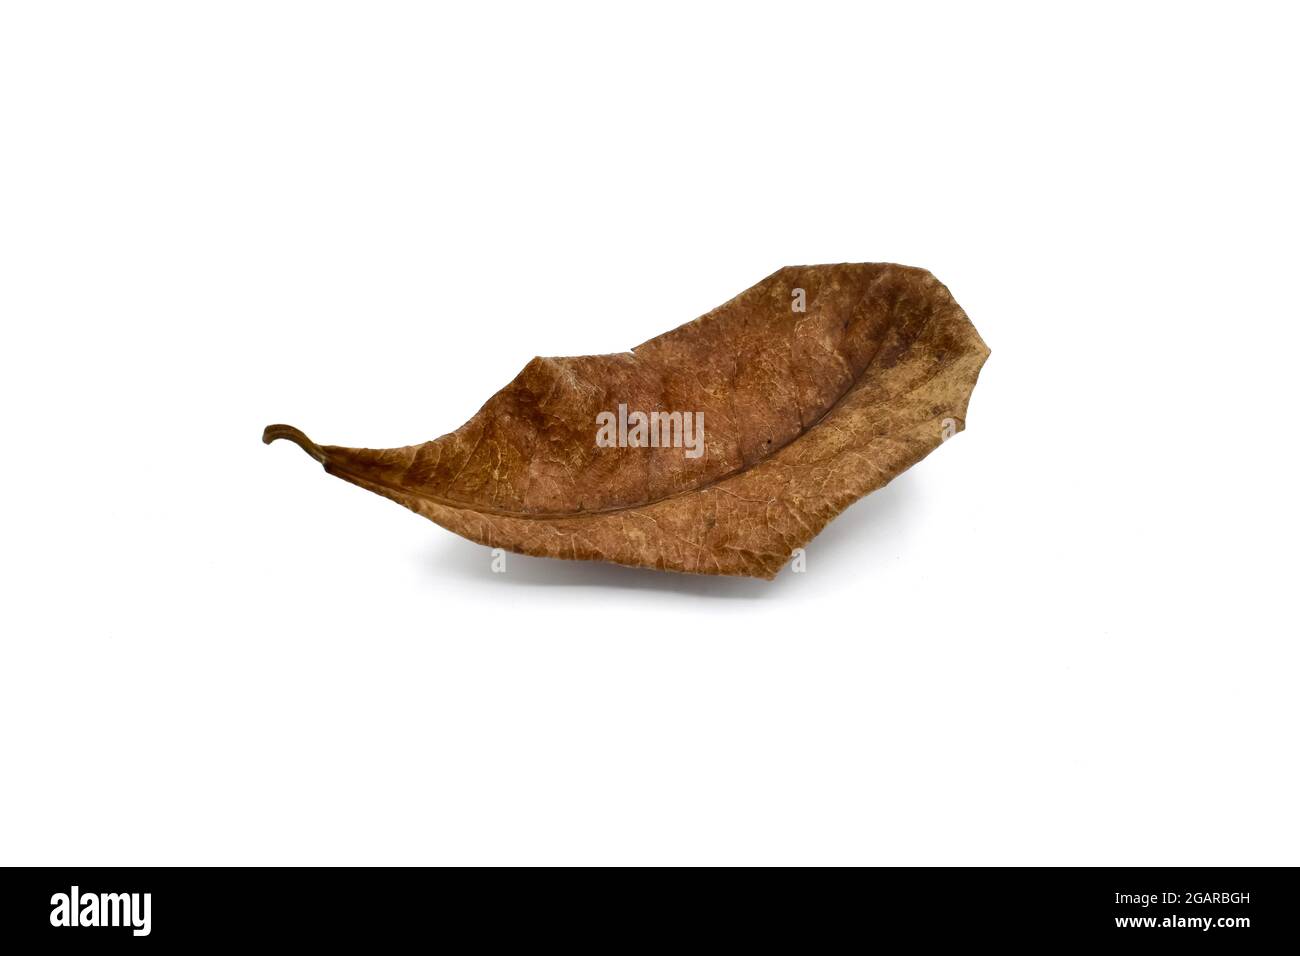 Single dry indian almond leaf isolated on white background. Stock Photo